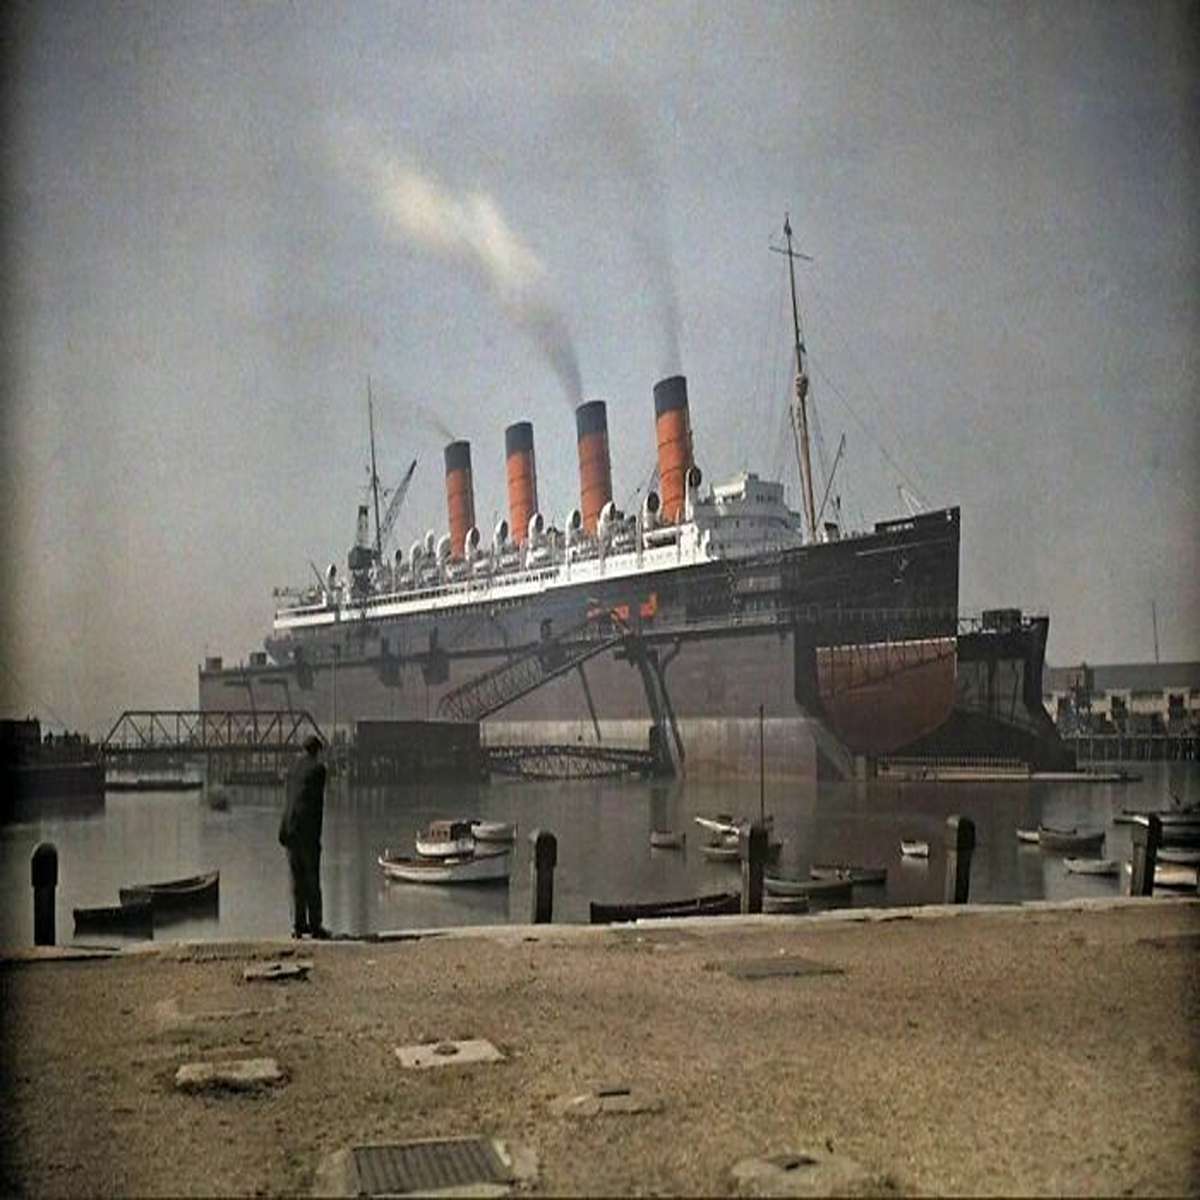 Rms Mauretania, The Largest Ship In The World From 1906 Until The Launch Of Rms Olympic In 1910. Photo By Clifton R. Adams For The National Geographic In Southampton, 1928. The Photo Was Colorised Using The Autochrome Process